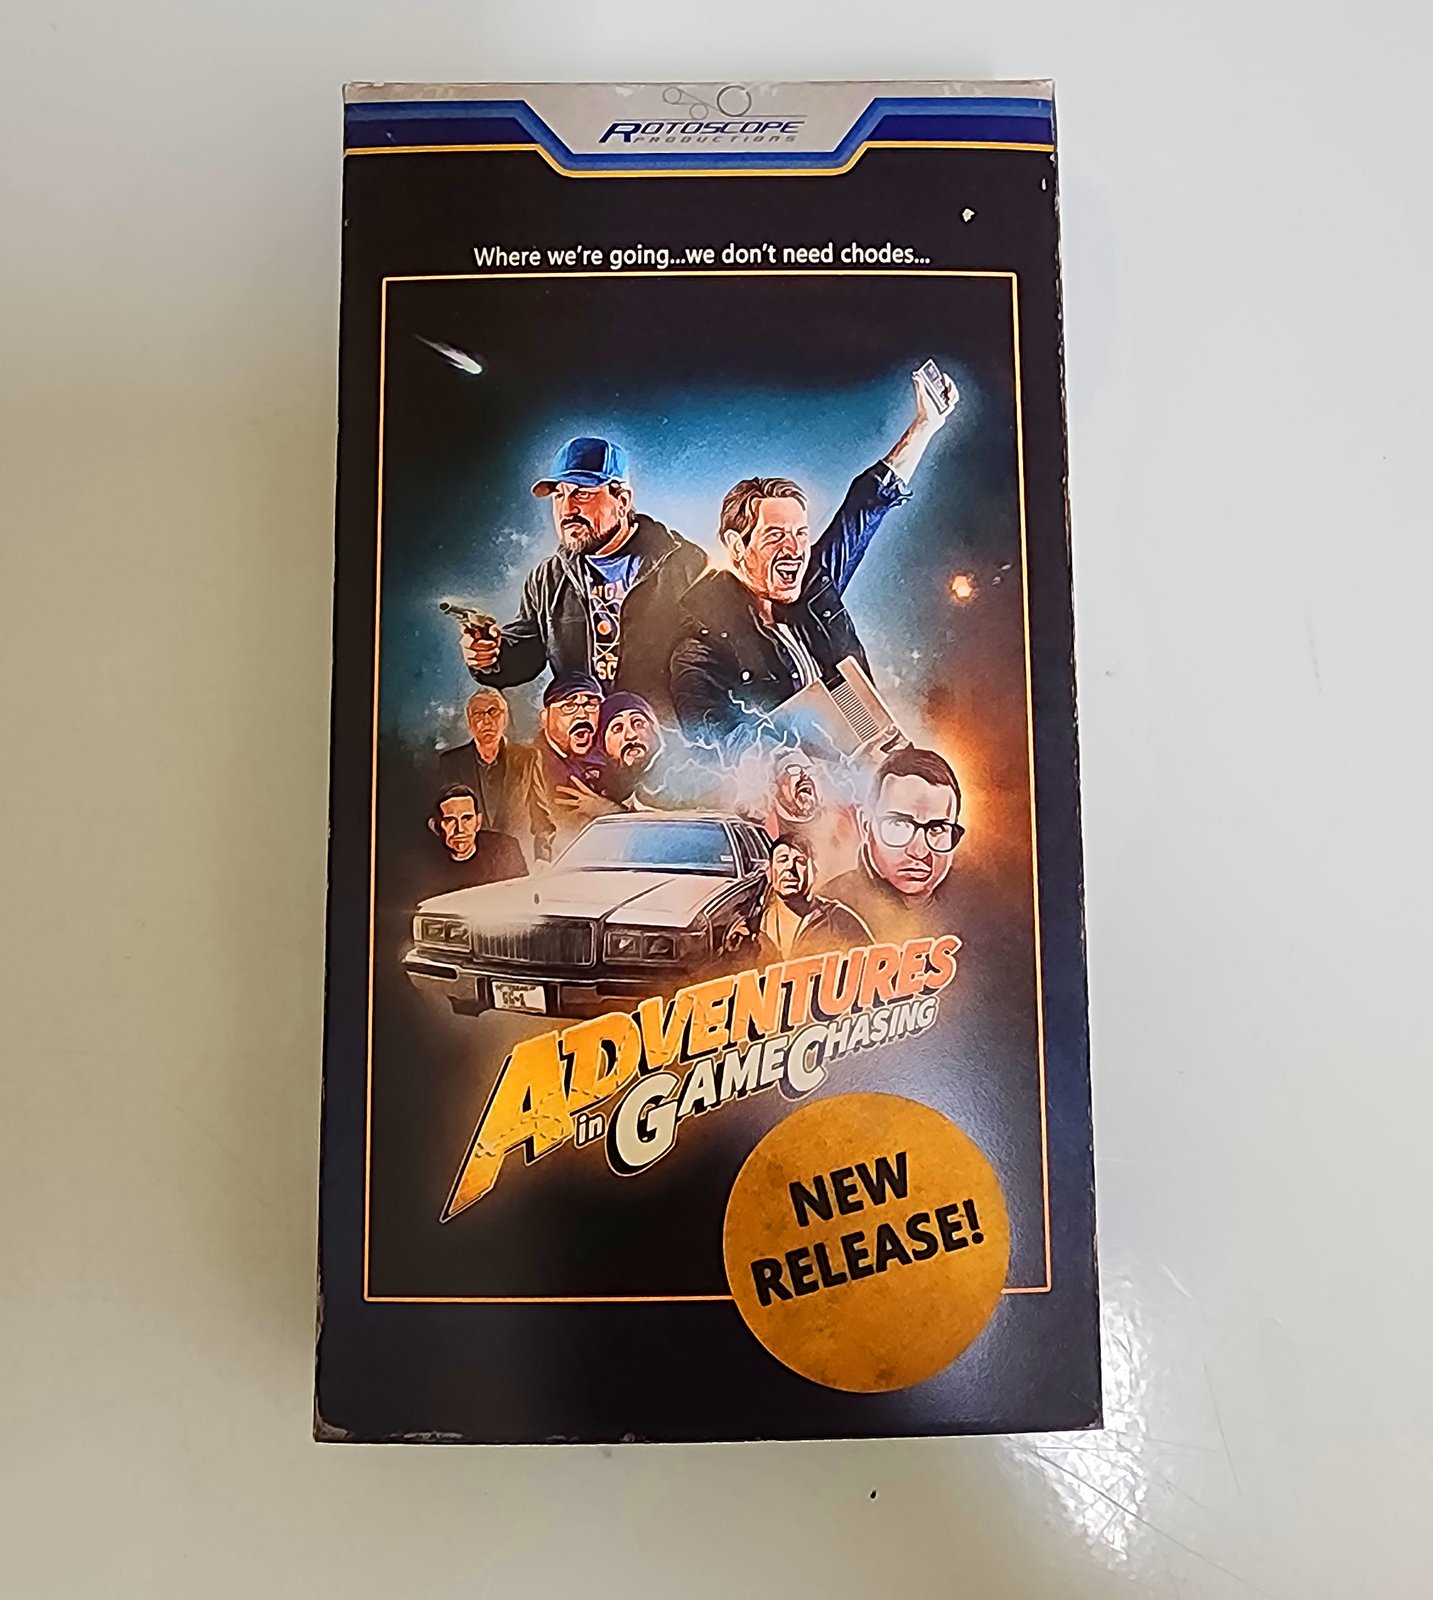 Adventures In Game Chasing Limited Edition VHS